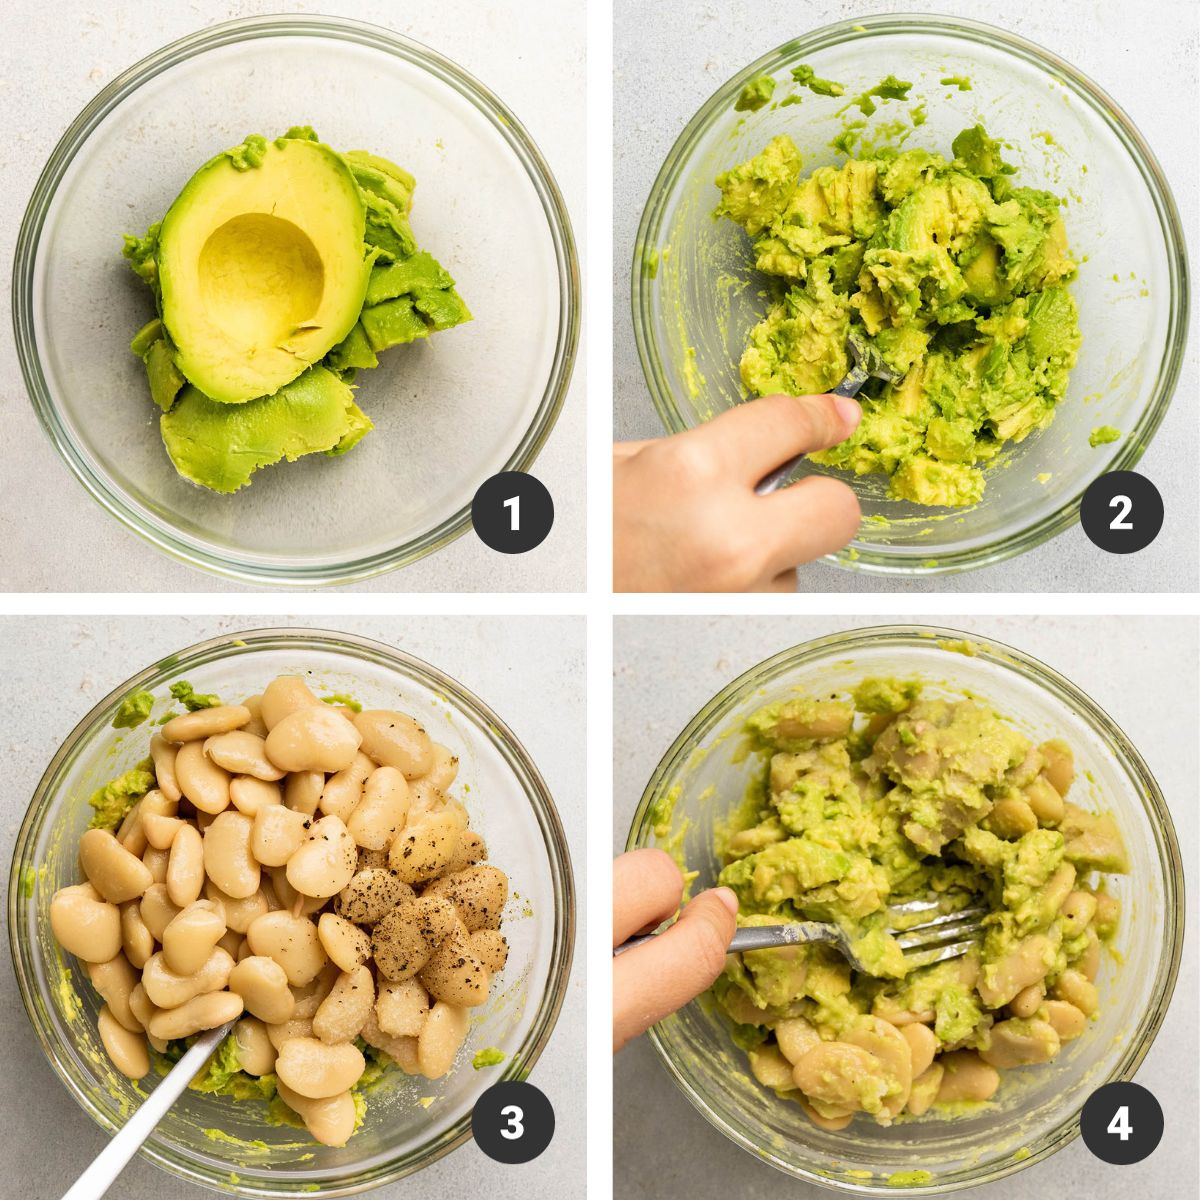 Mashing avocado with butter beans in a glass bowl.